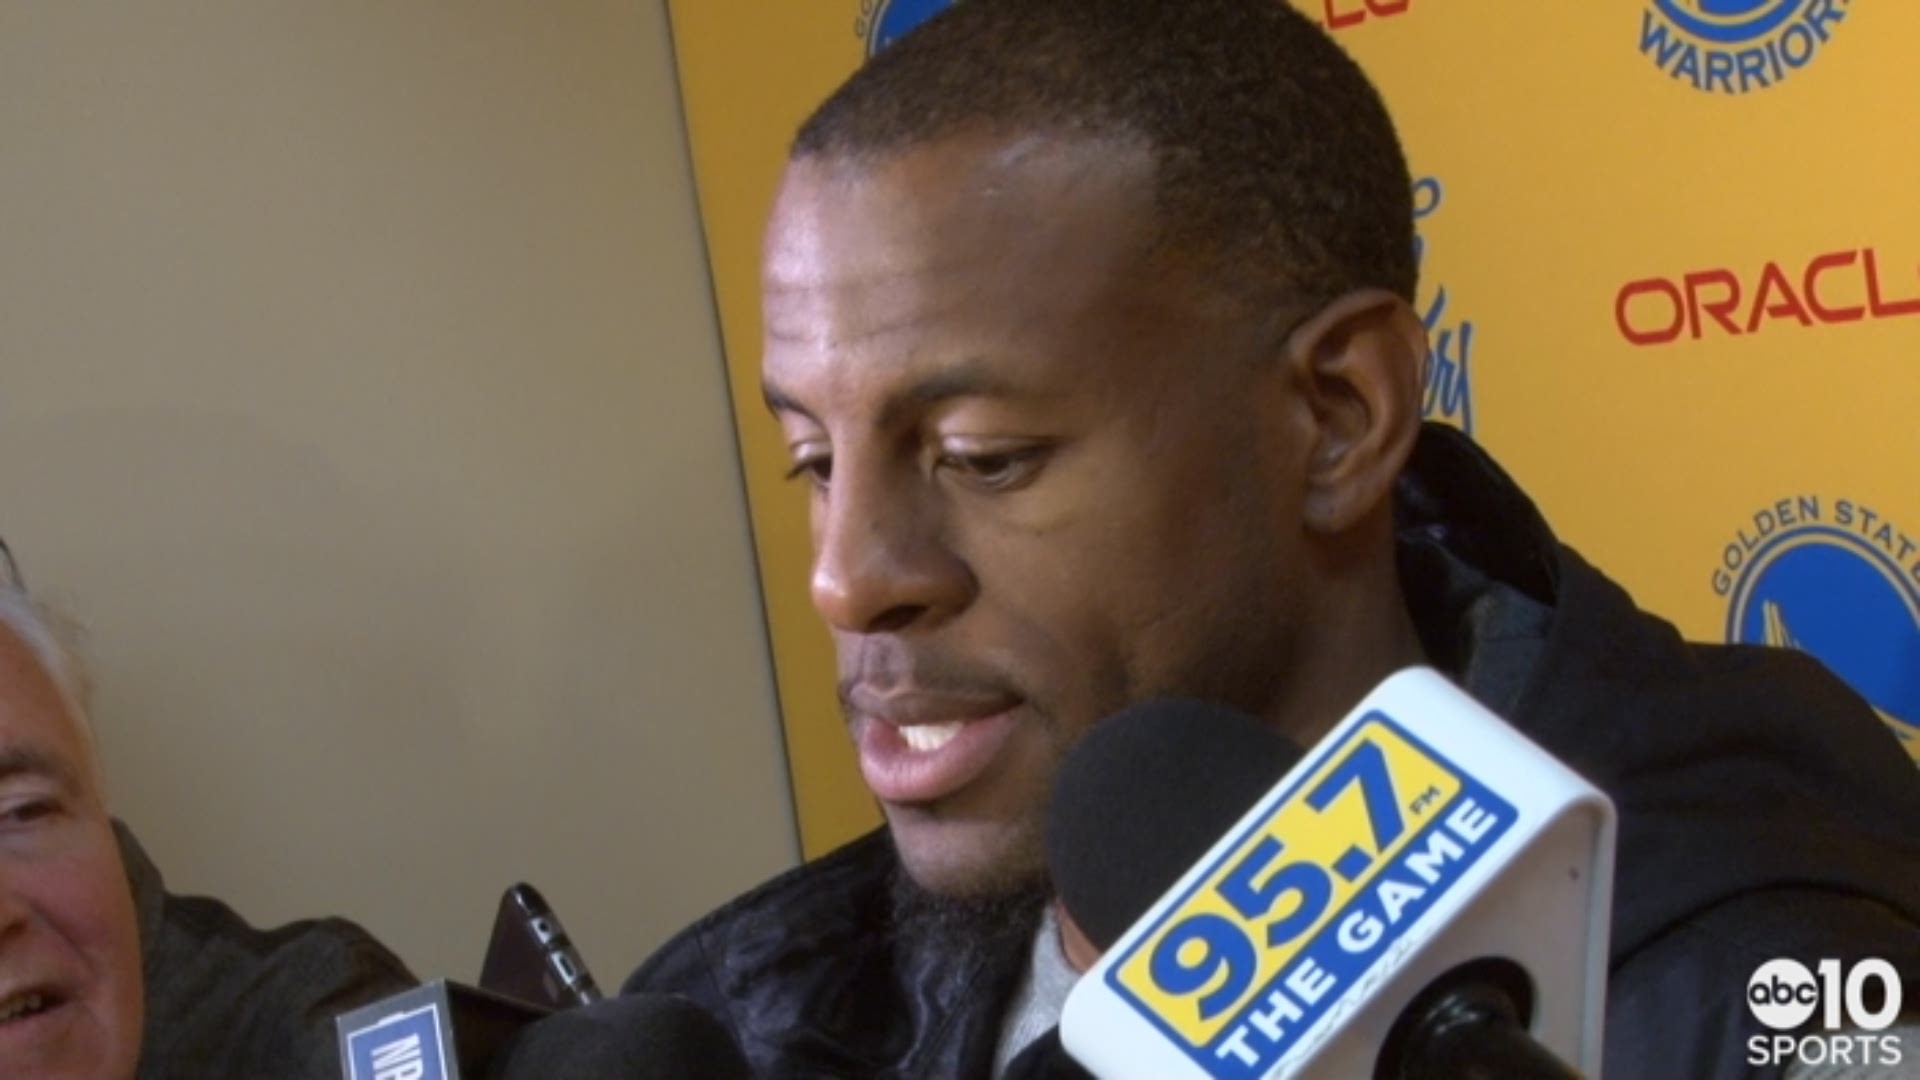 Warriors' forward Andre Iguodala praises his team overcoming turnovers and a better effort from the Spurs, as Golden State improved to a 2-0 playoff series lead with Monday's 116-101 win over San Antonio.